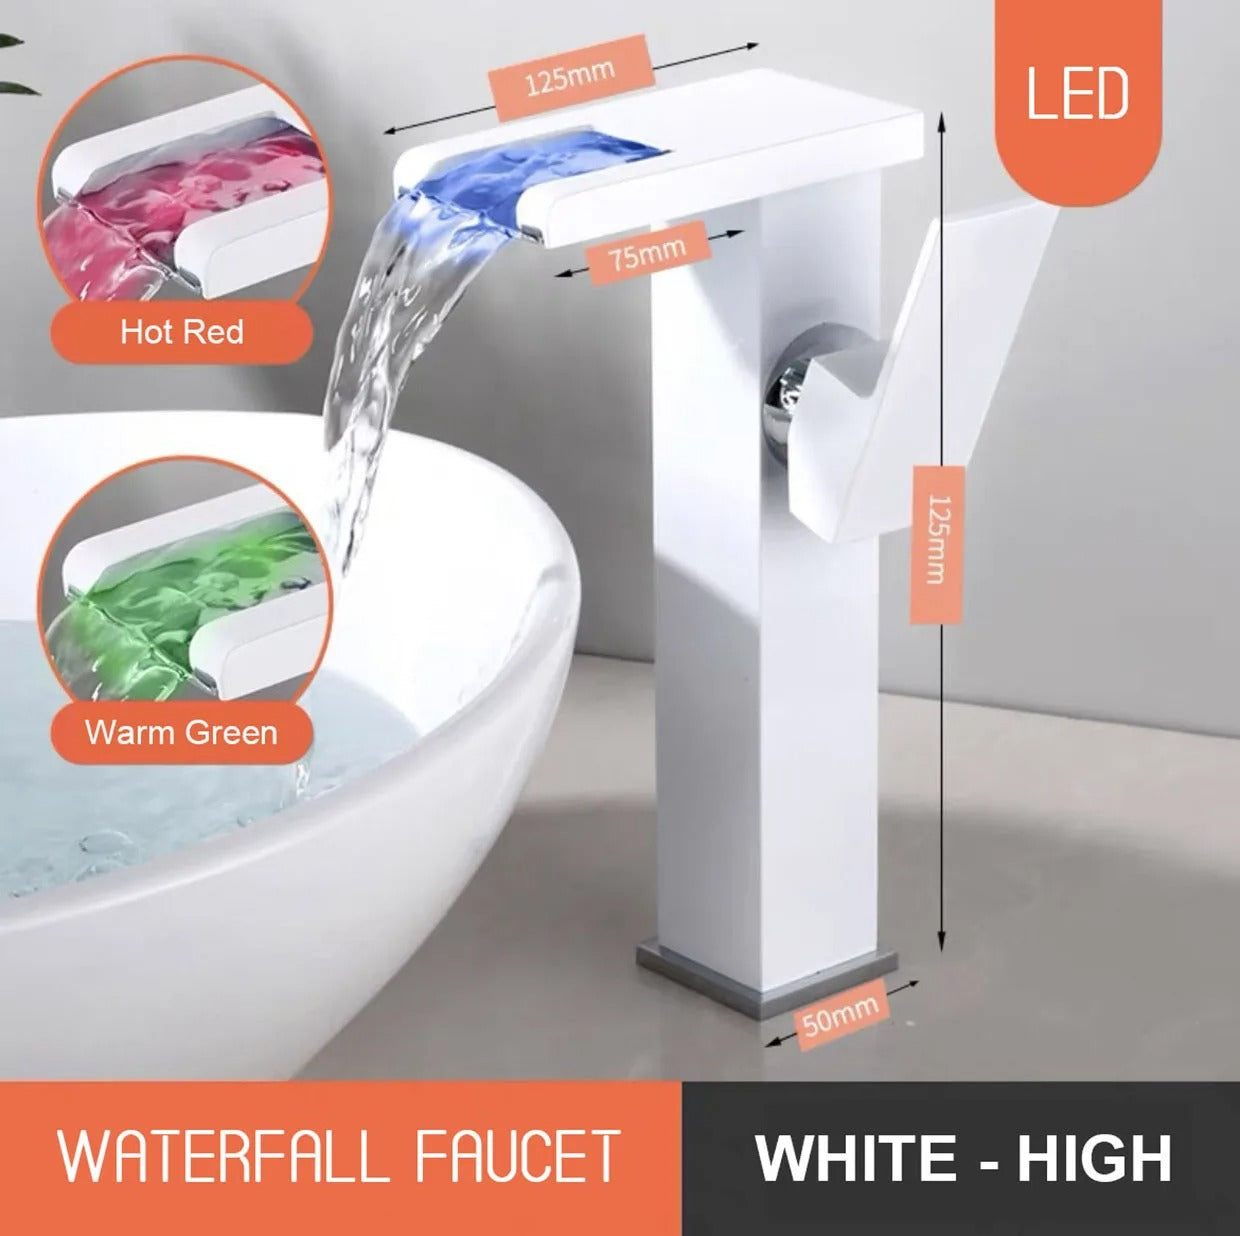 LED Waterfall Faucet Hot Cold Color Changing Smart Luminous Mixer Tap Bathroom Wash